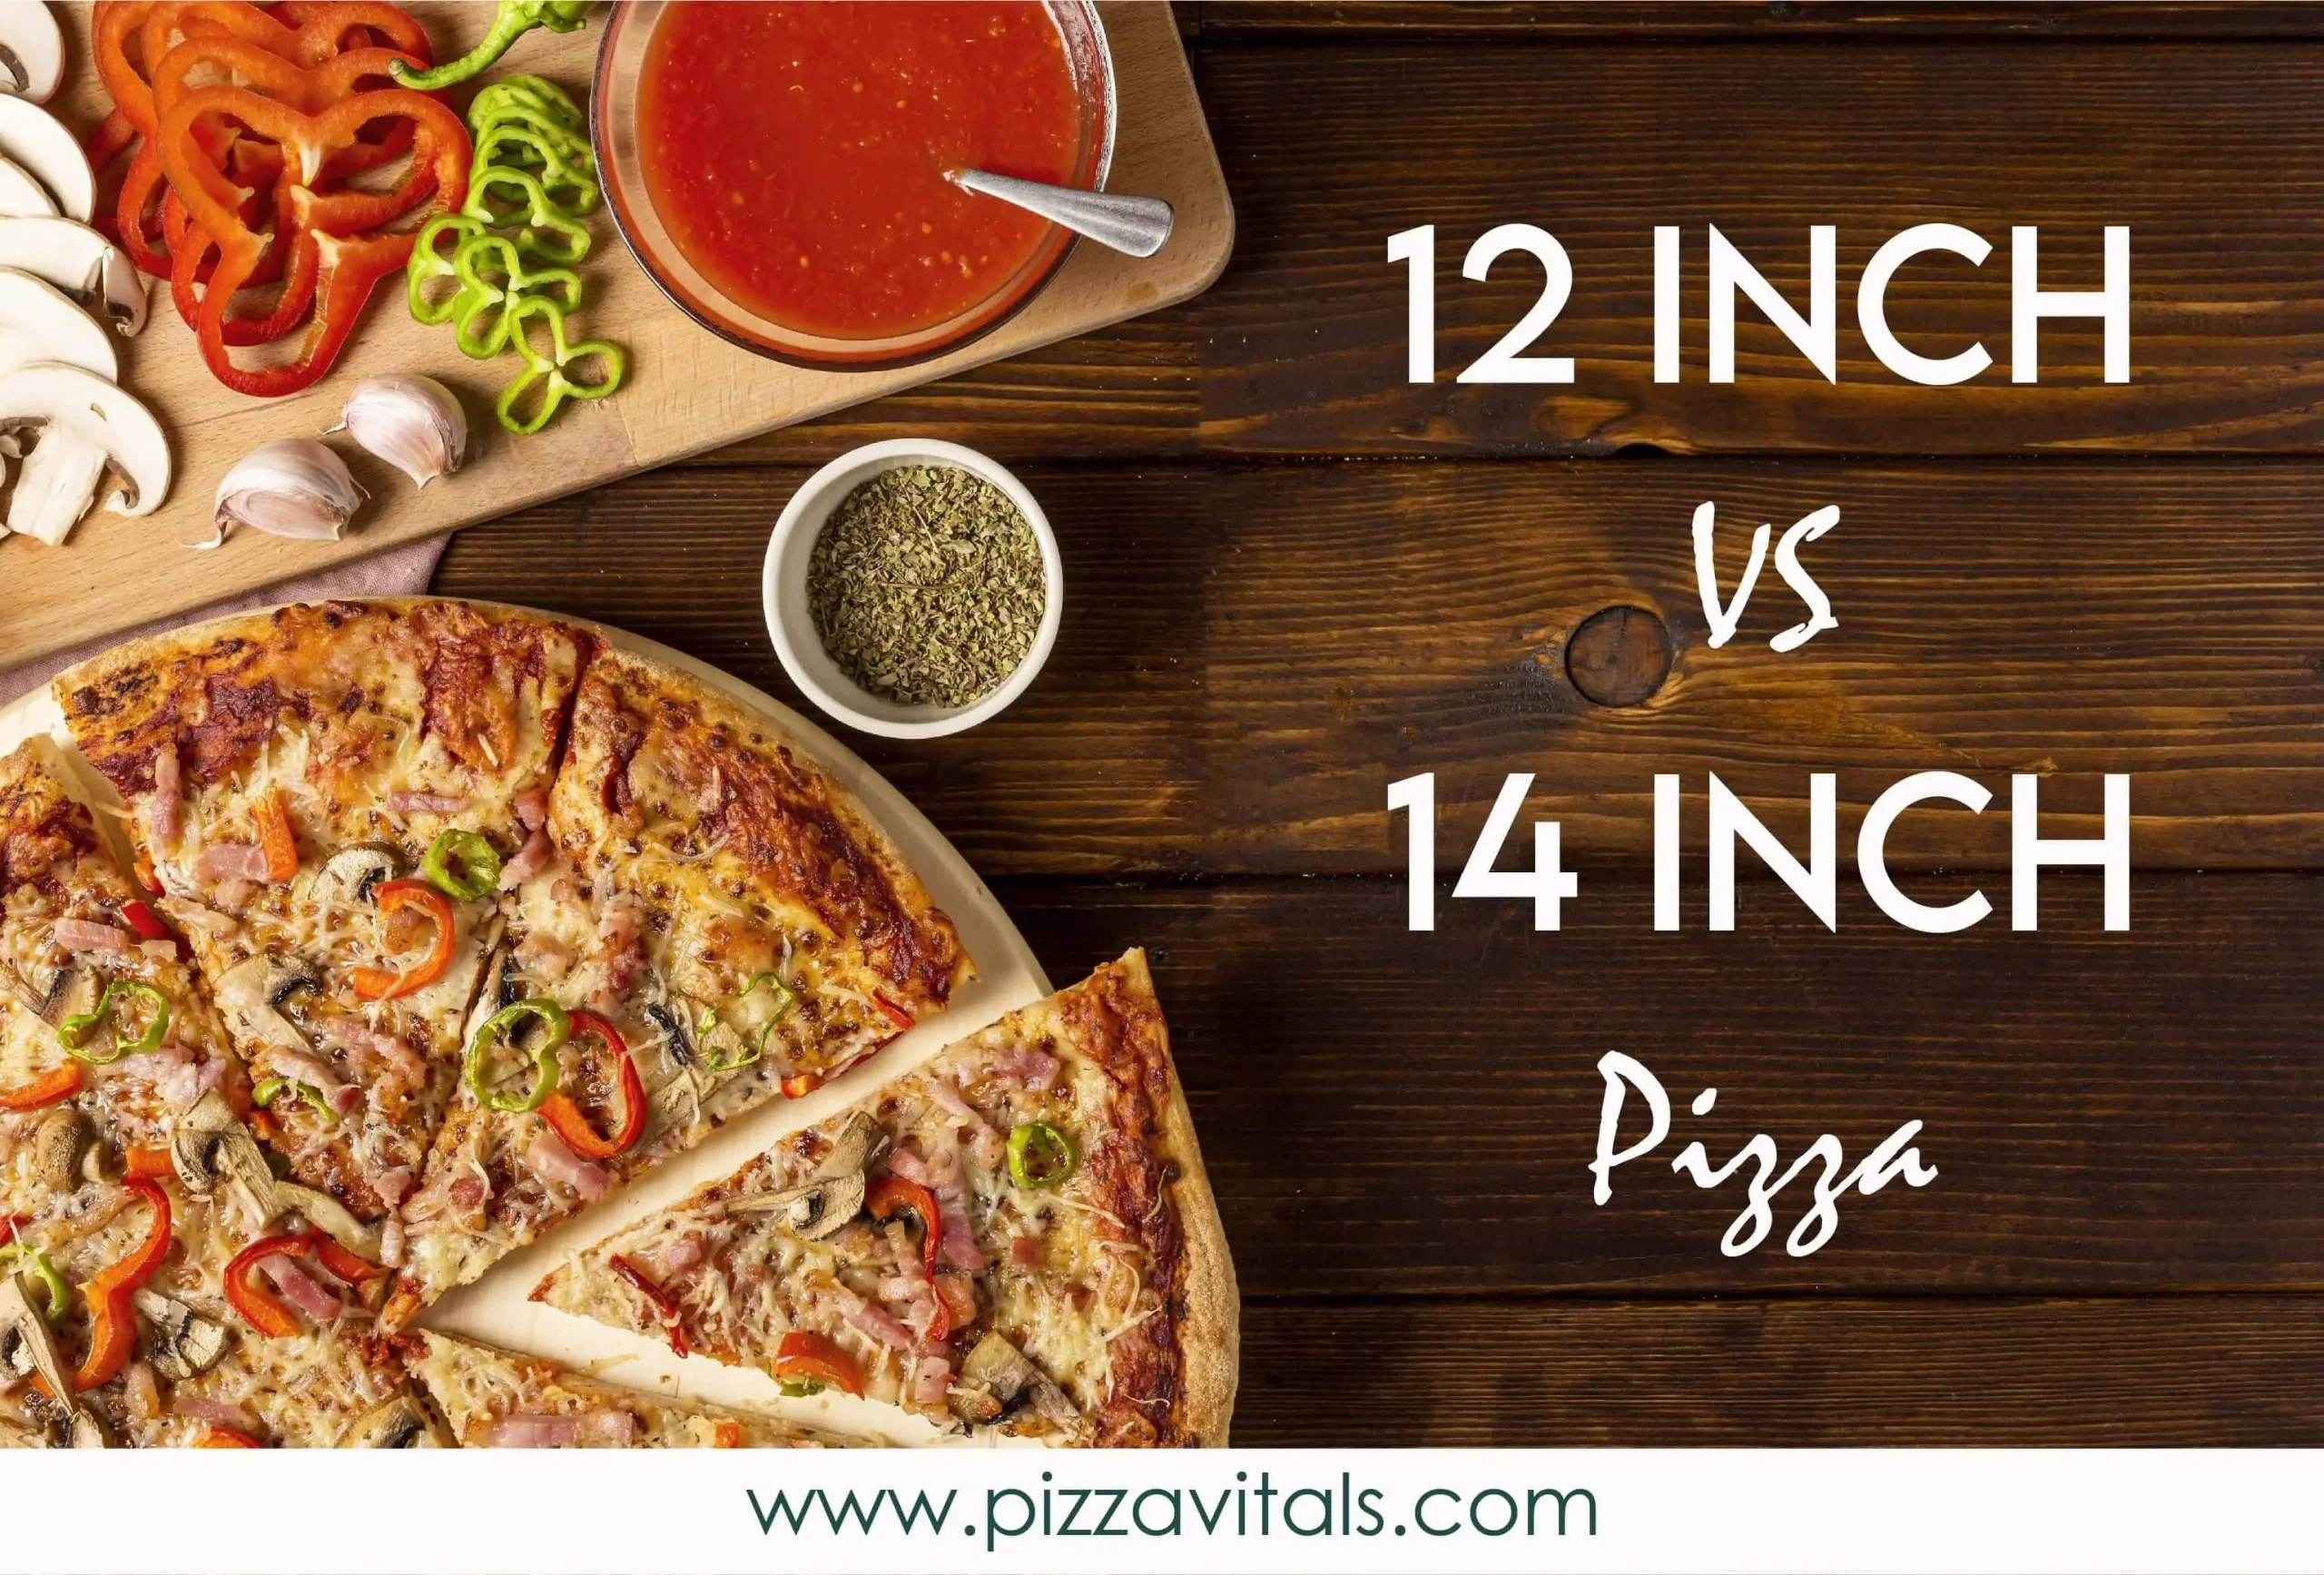 Size Matters: 12 inch vs 14 inch Pizza, Which one to choose?